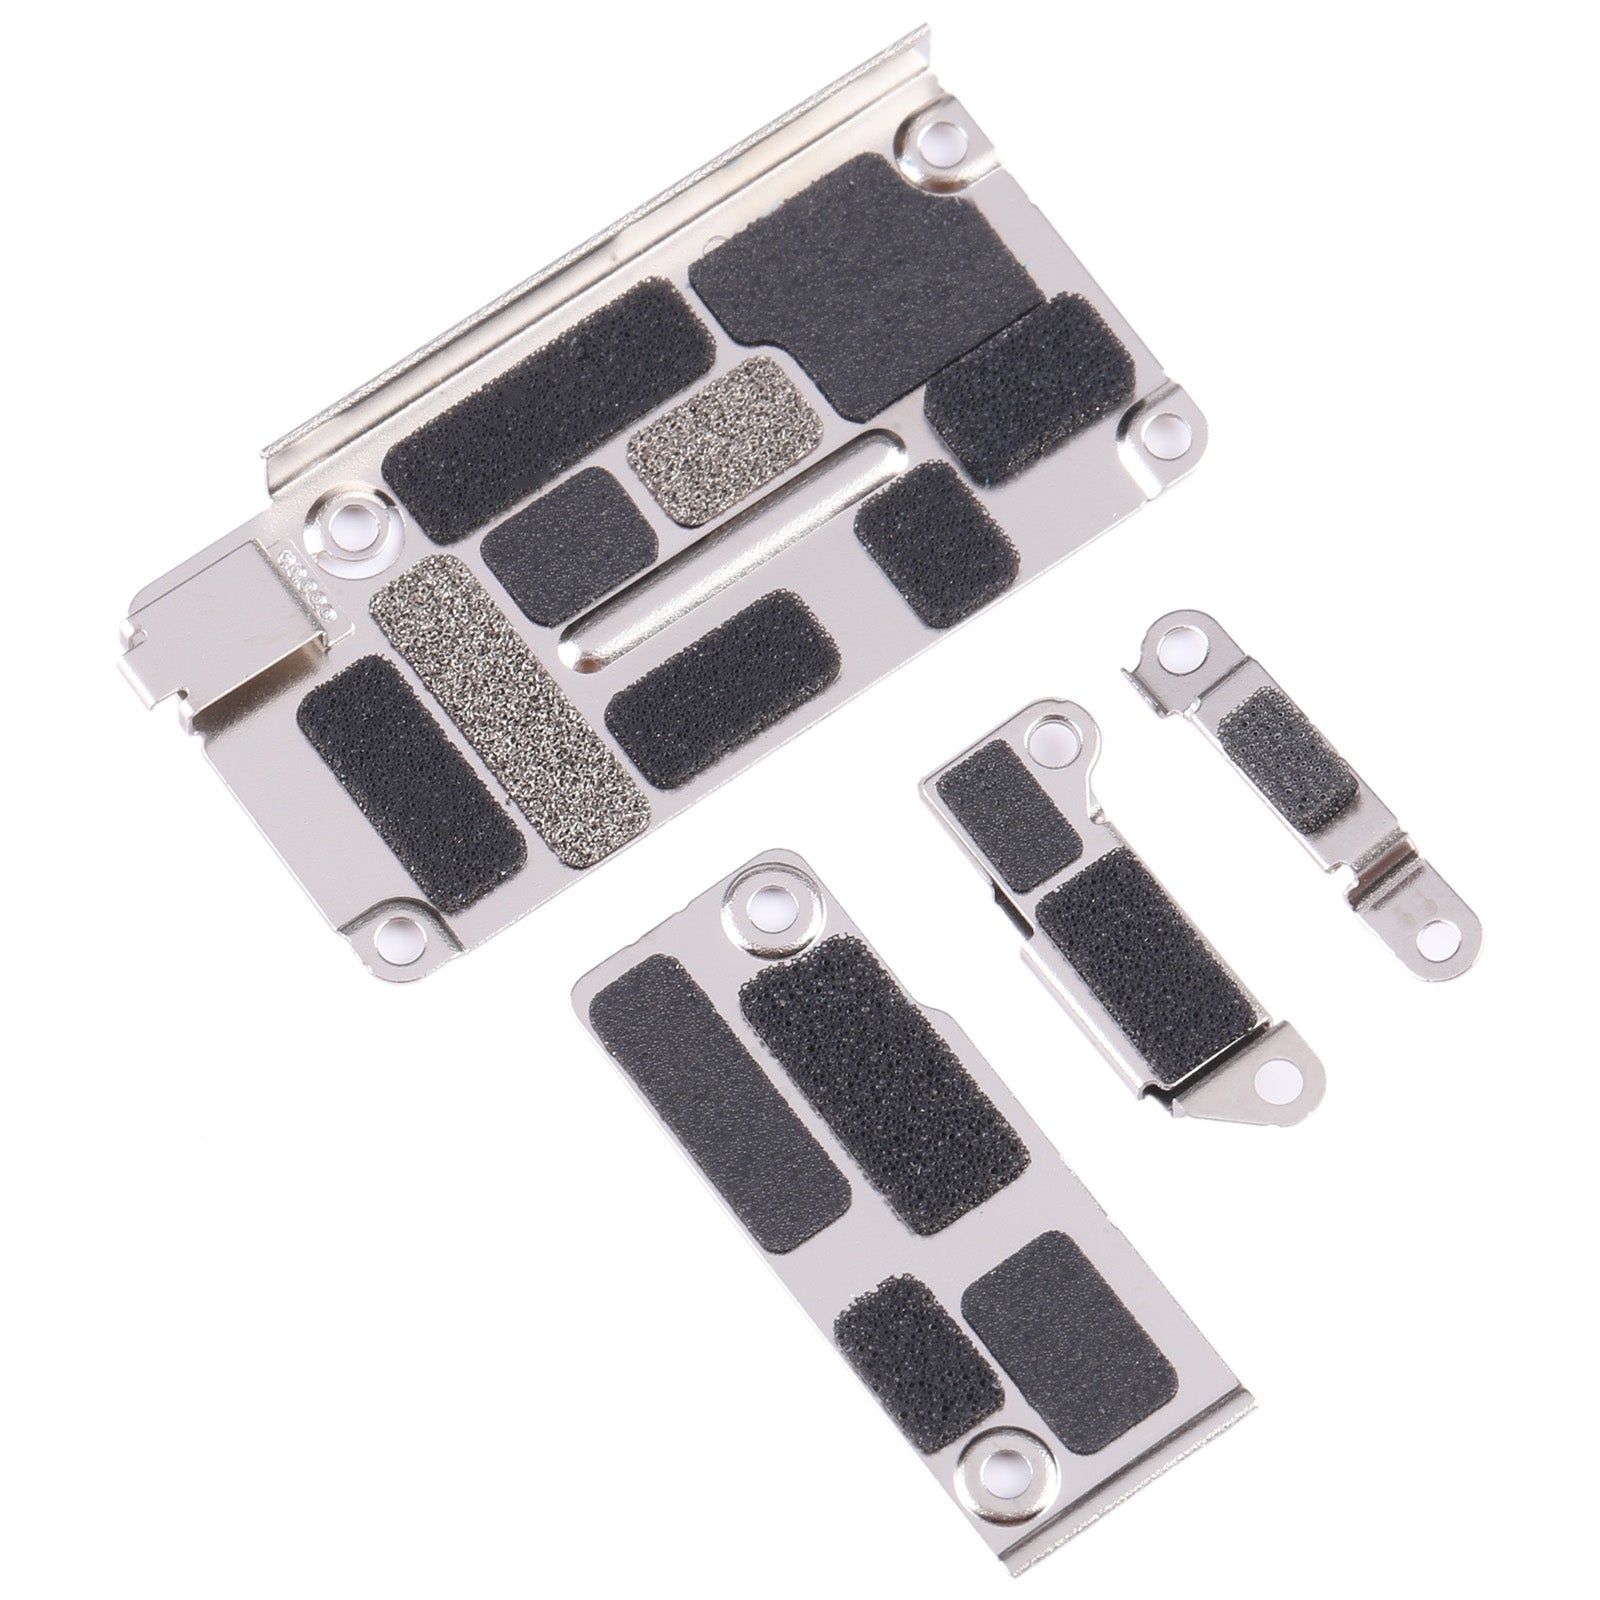 Pack of Internal Metal Parts iPhone 12 Pro / 12